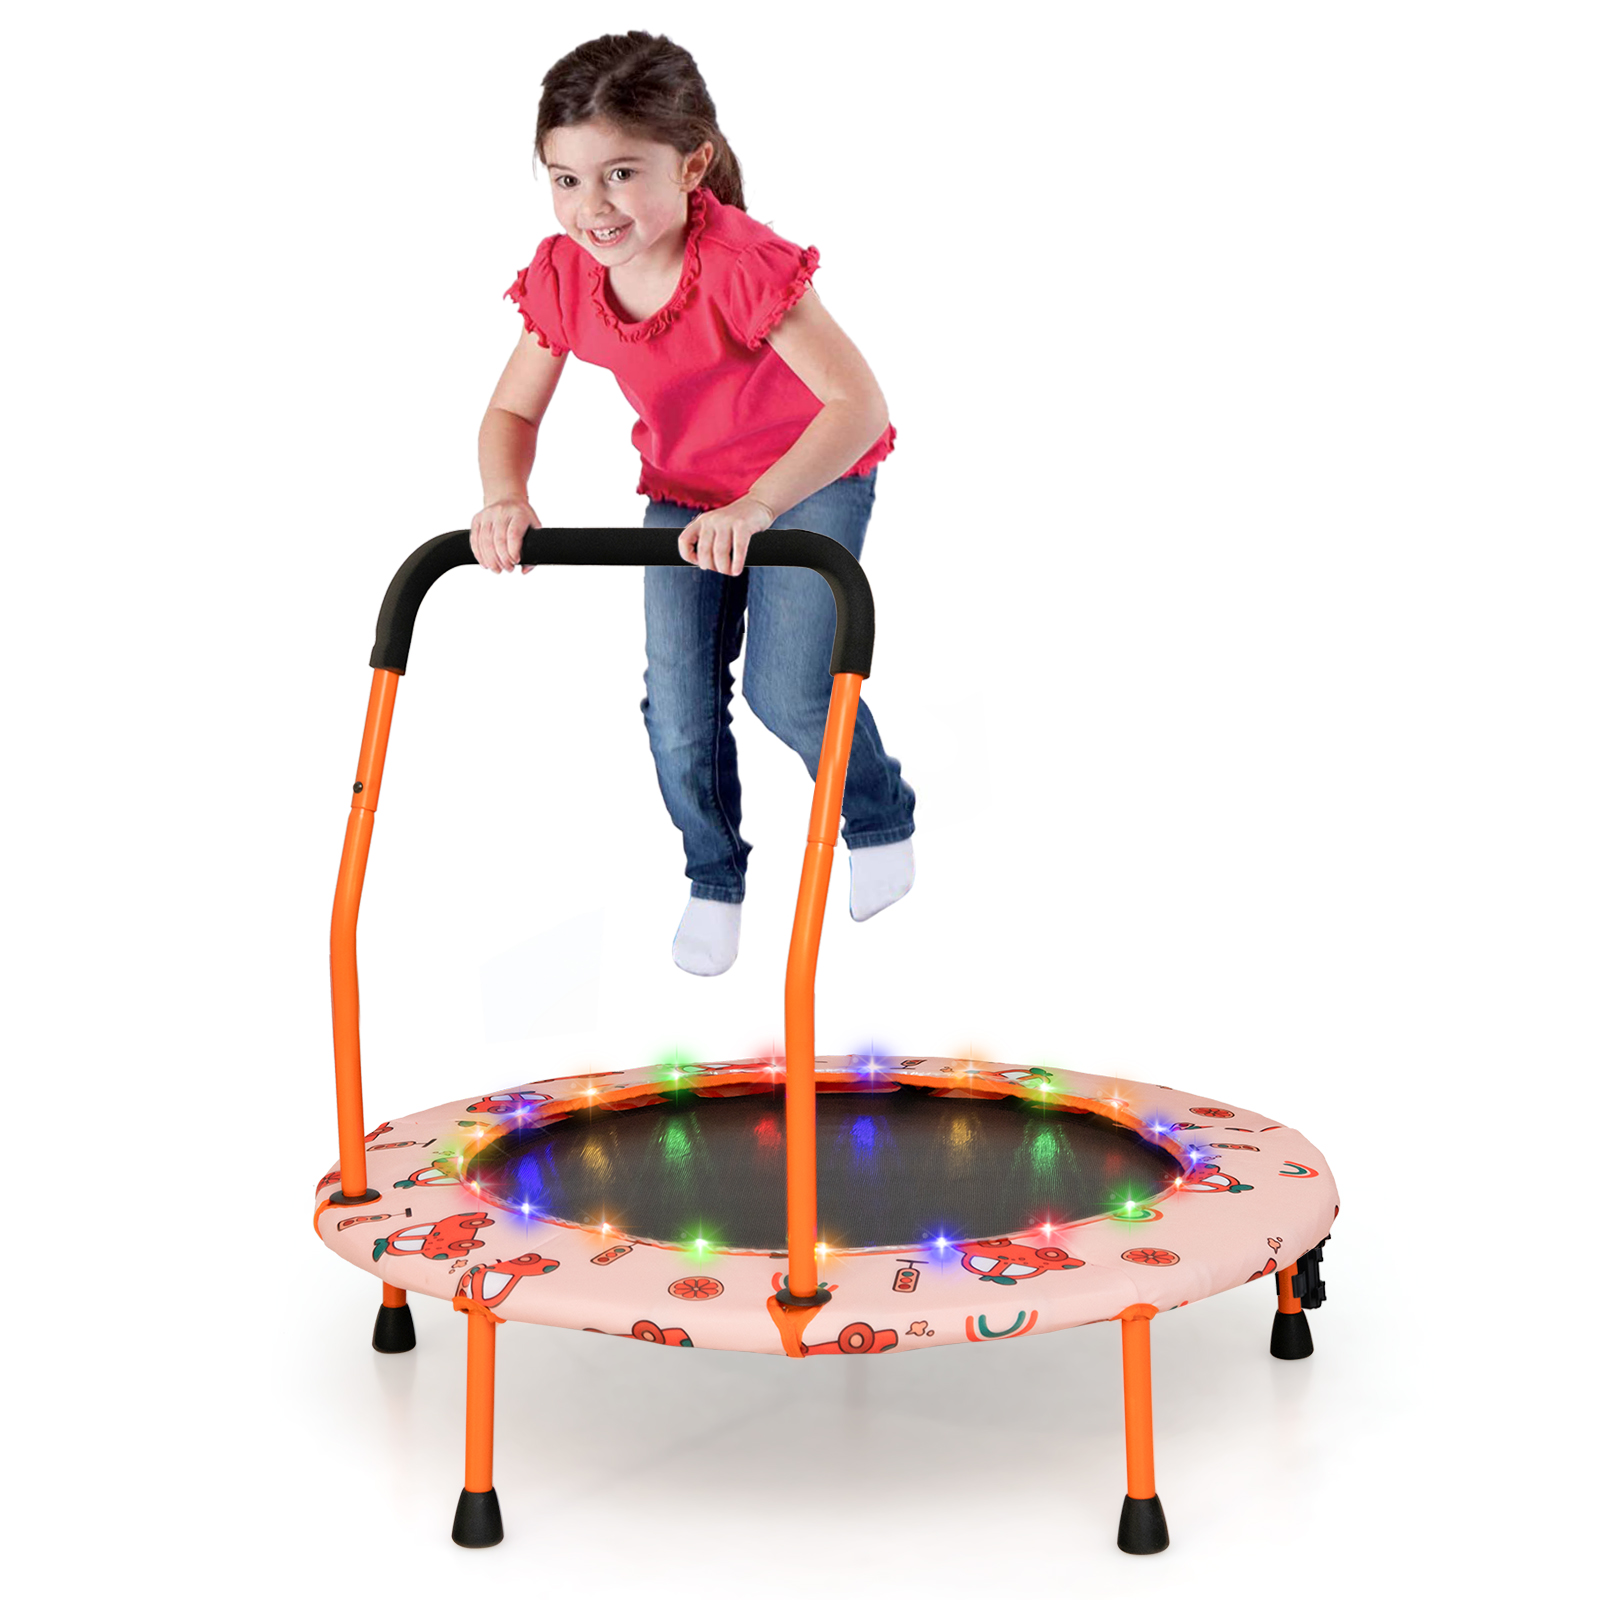 Mini Trampoline for Children with LED Lights and Safety Handle-Orange